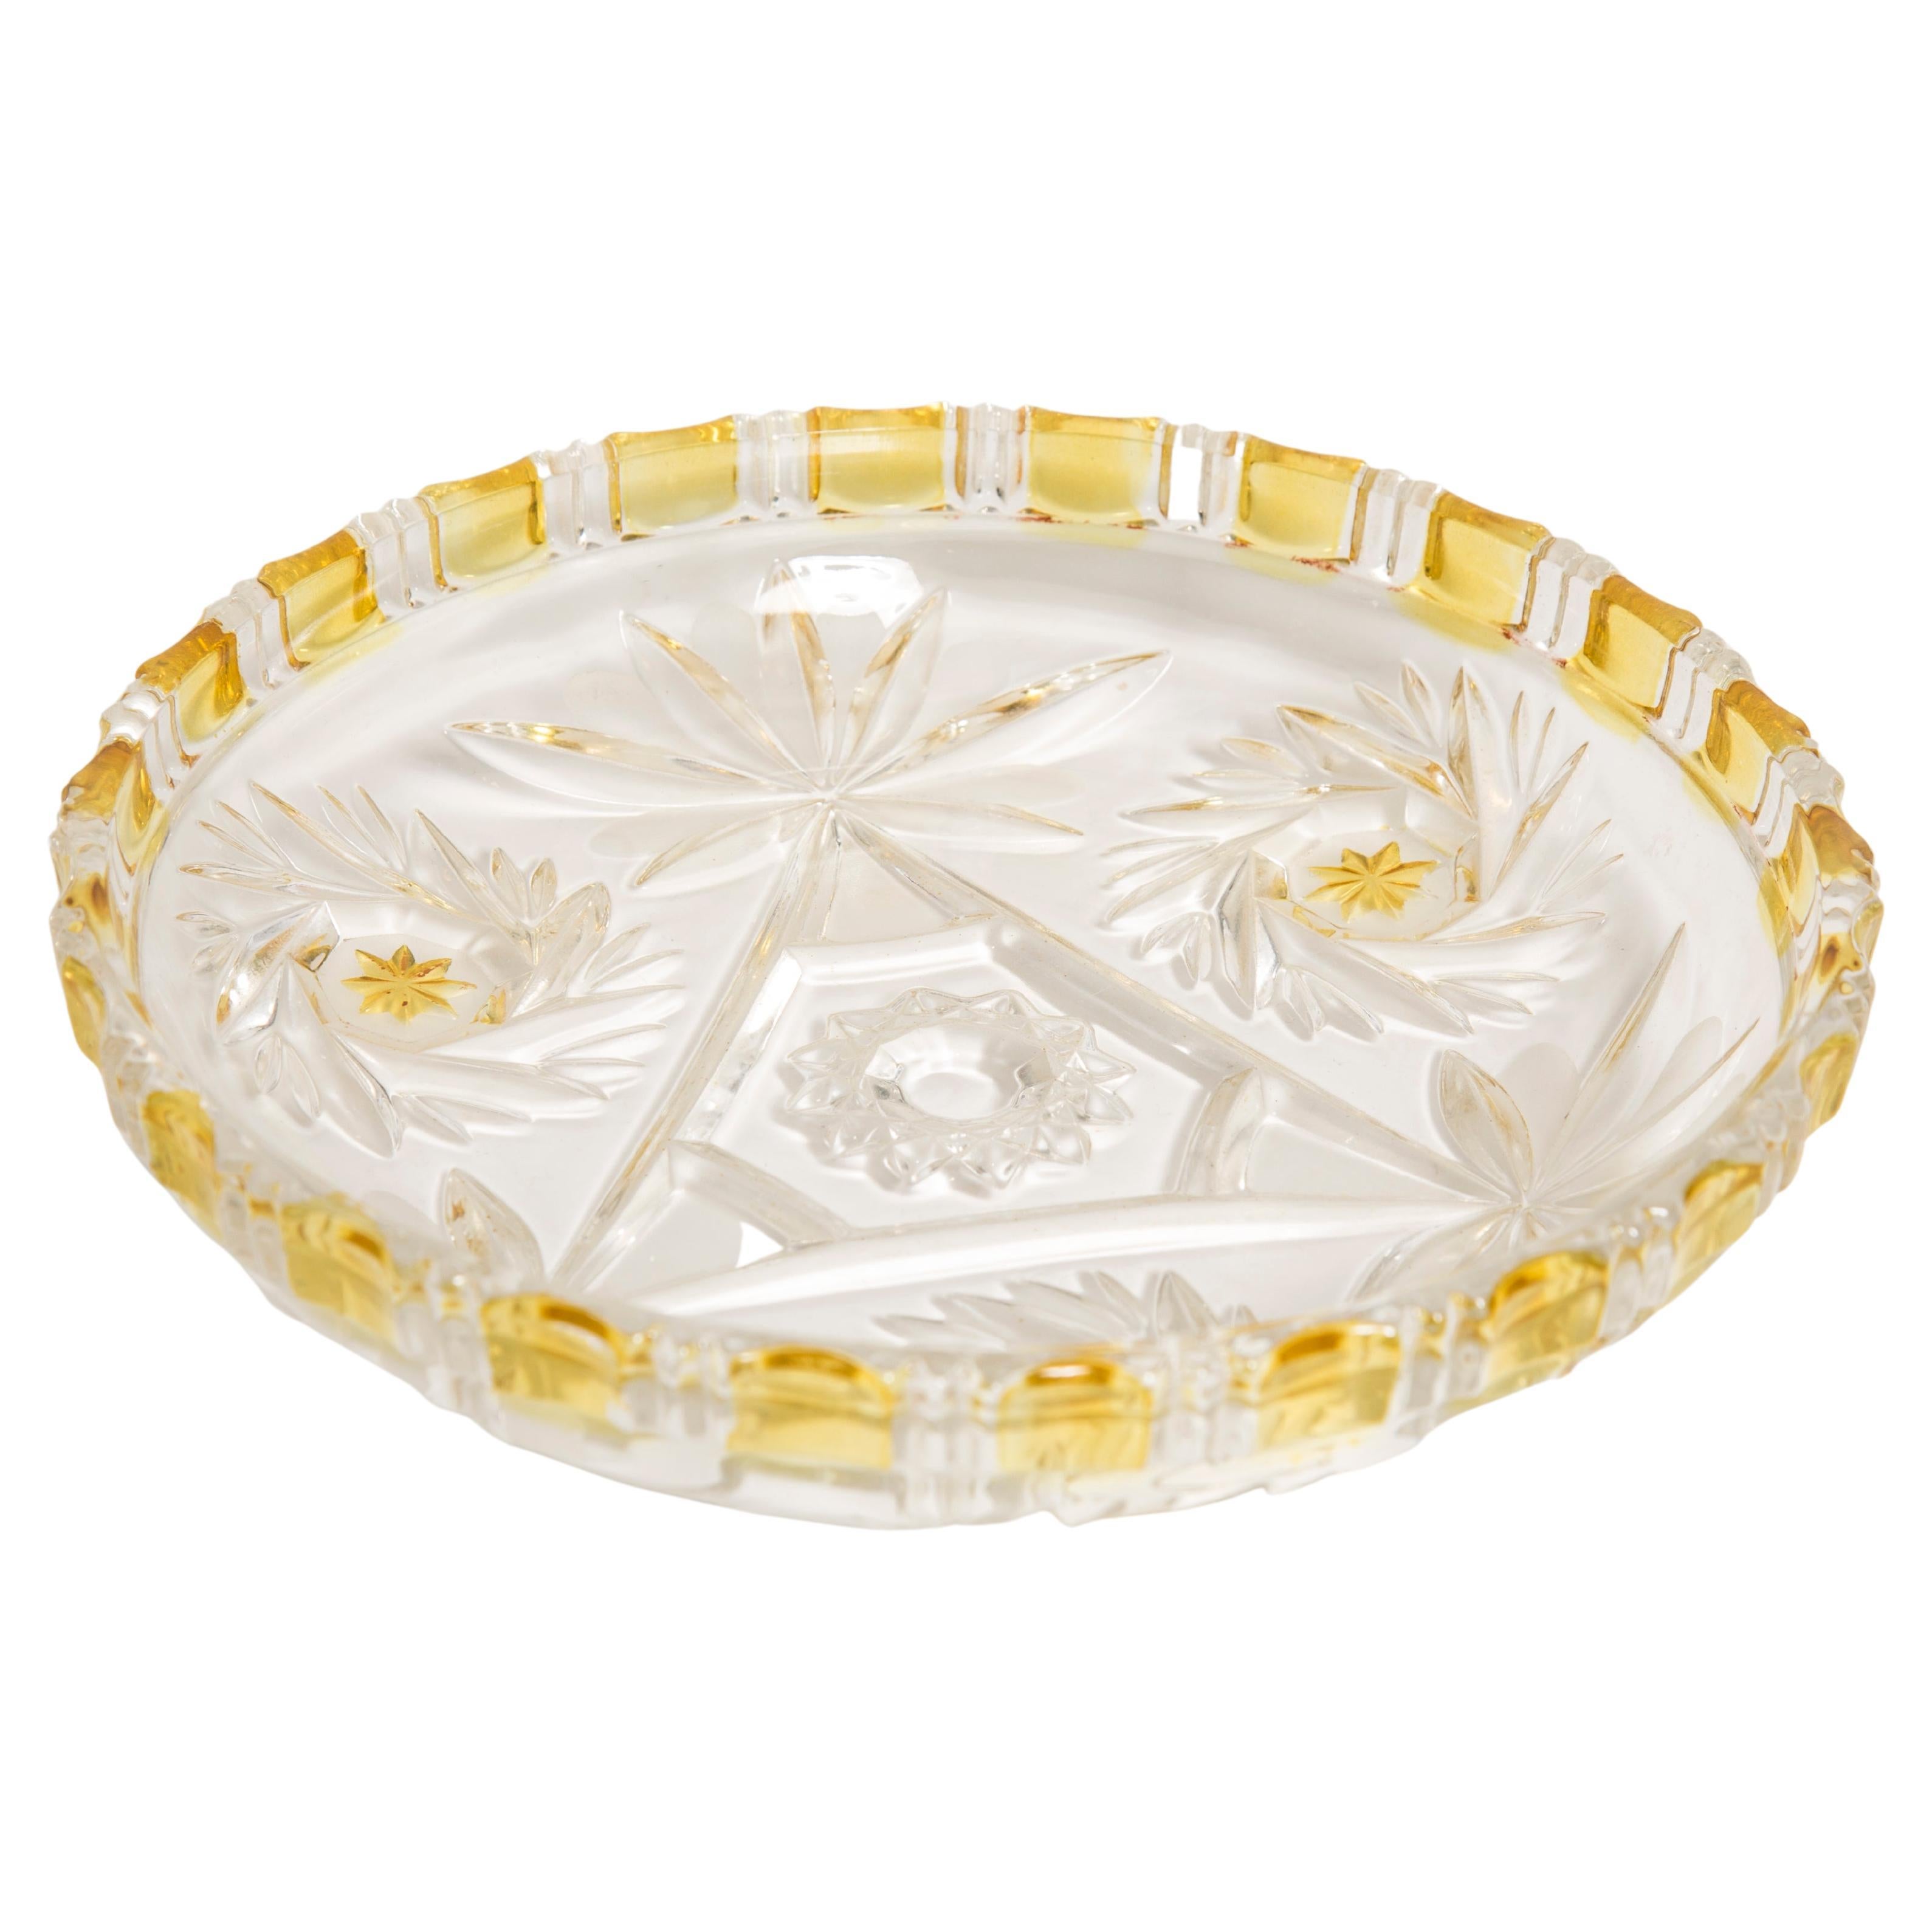 Vintage Transparent and Yellow Decorative Glass Plate, Italy, 1960s For Sale